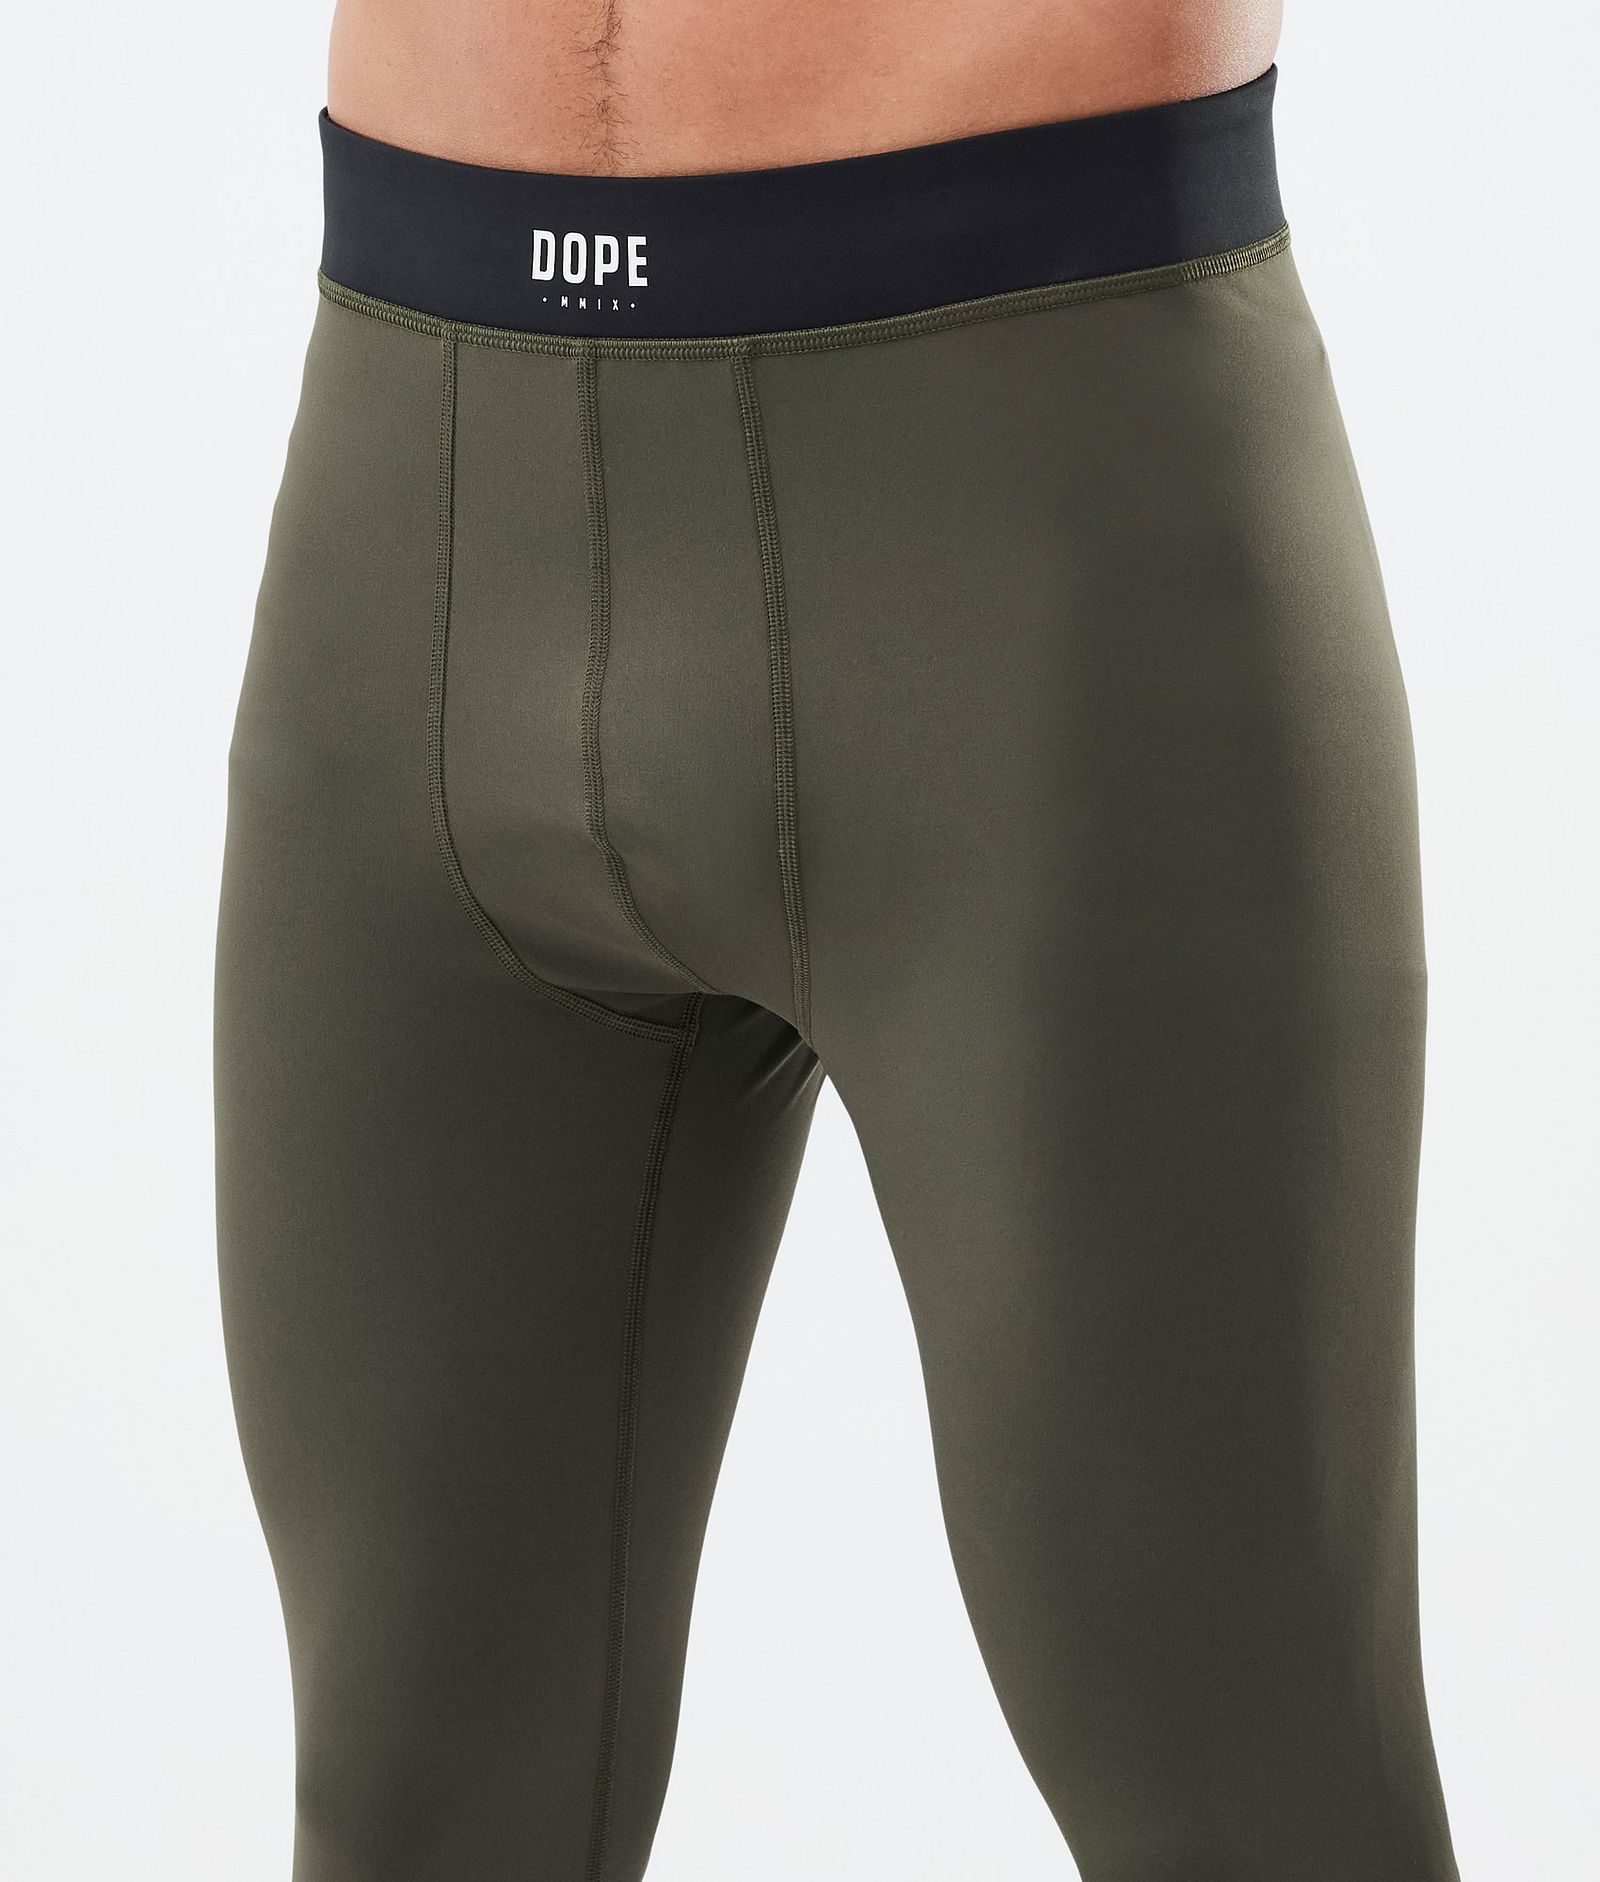 Snuggle Pantalon thermique Homme 2X-Up Olive Green